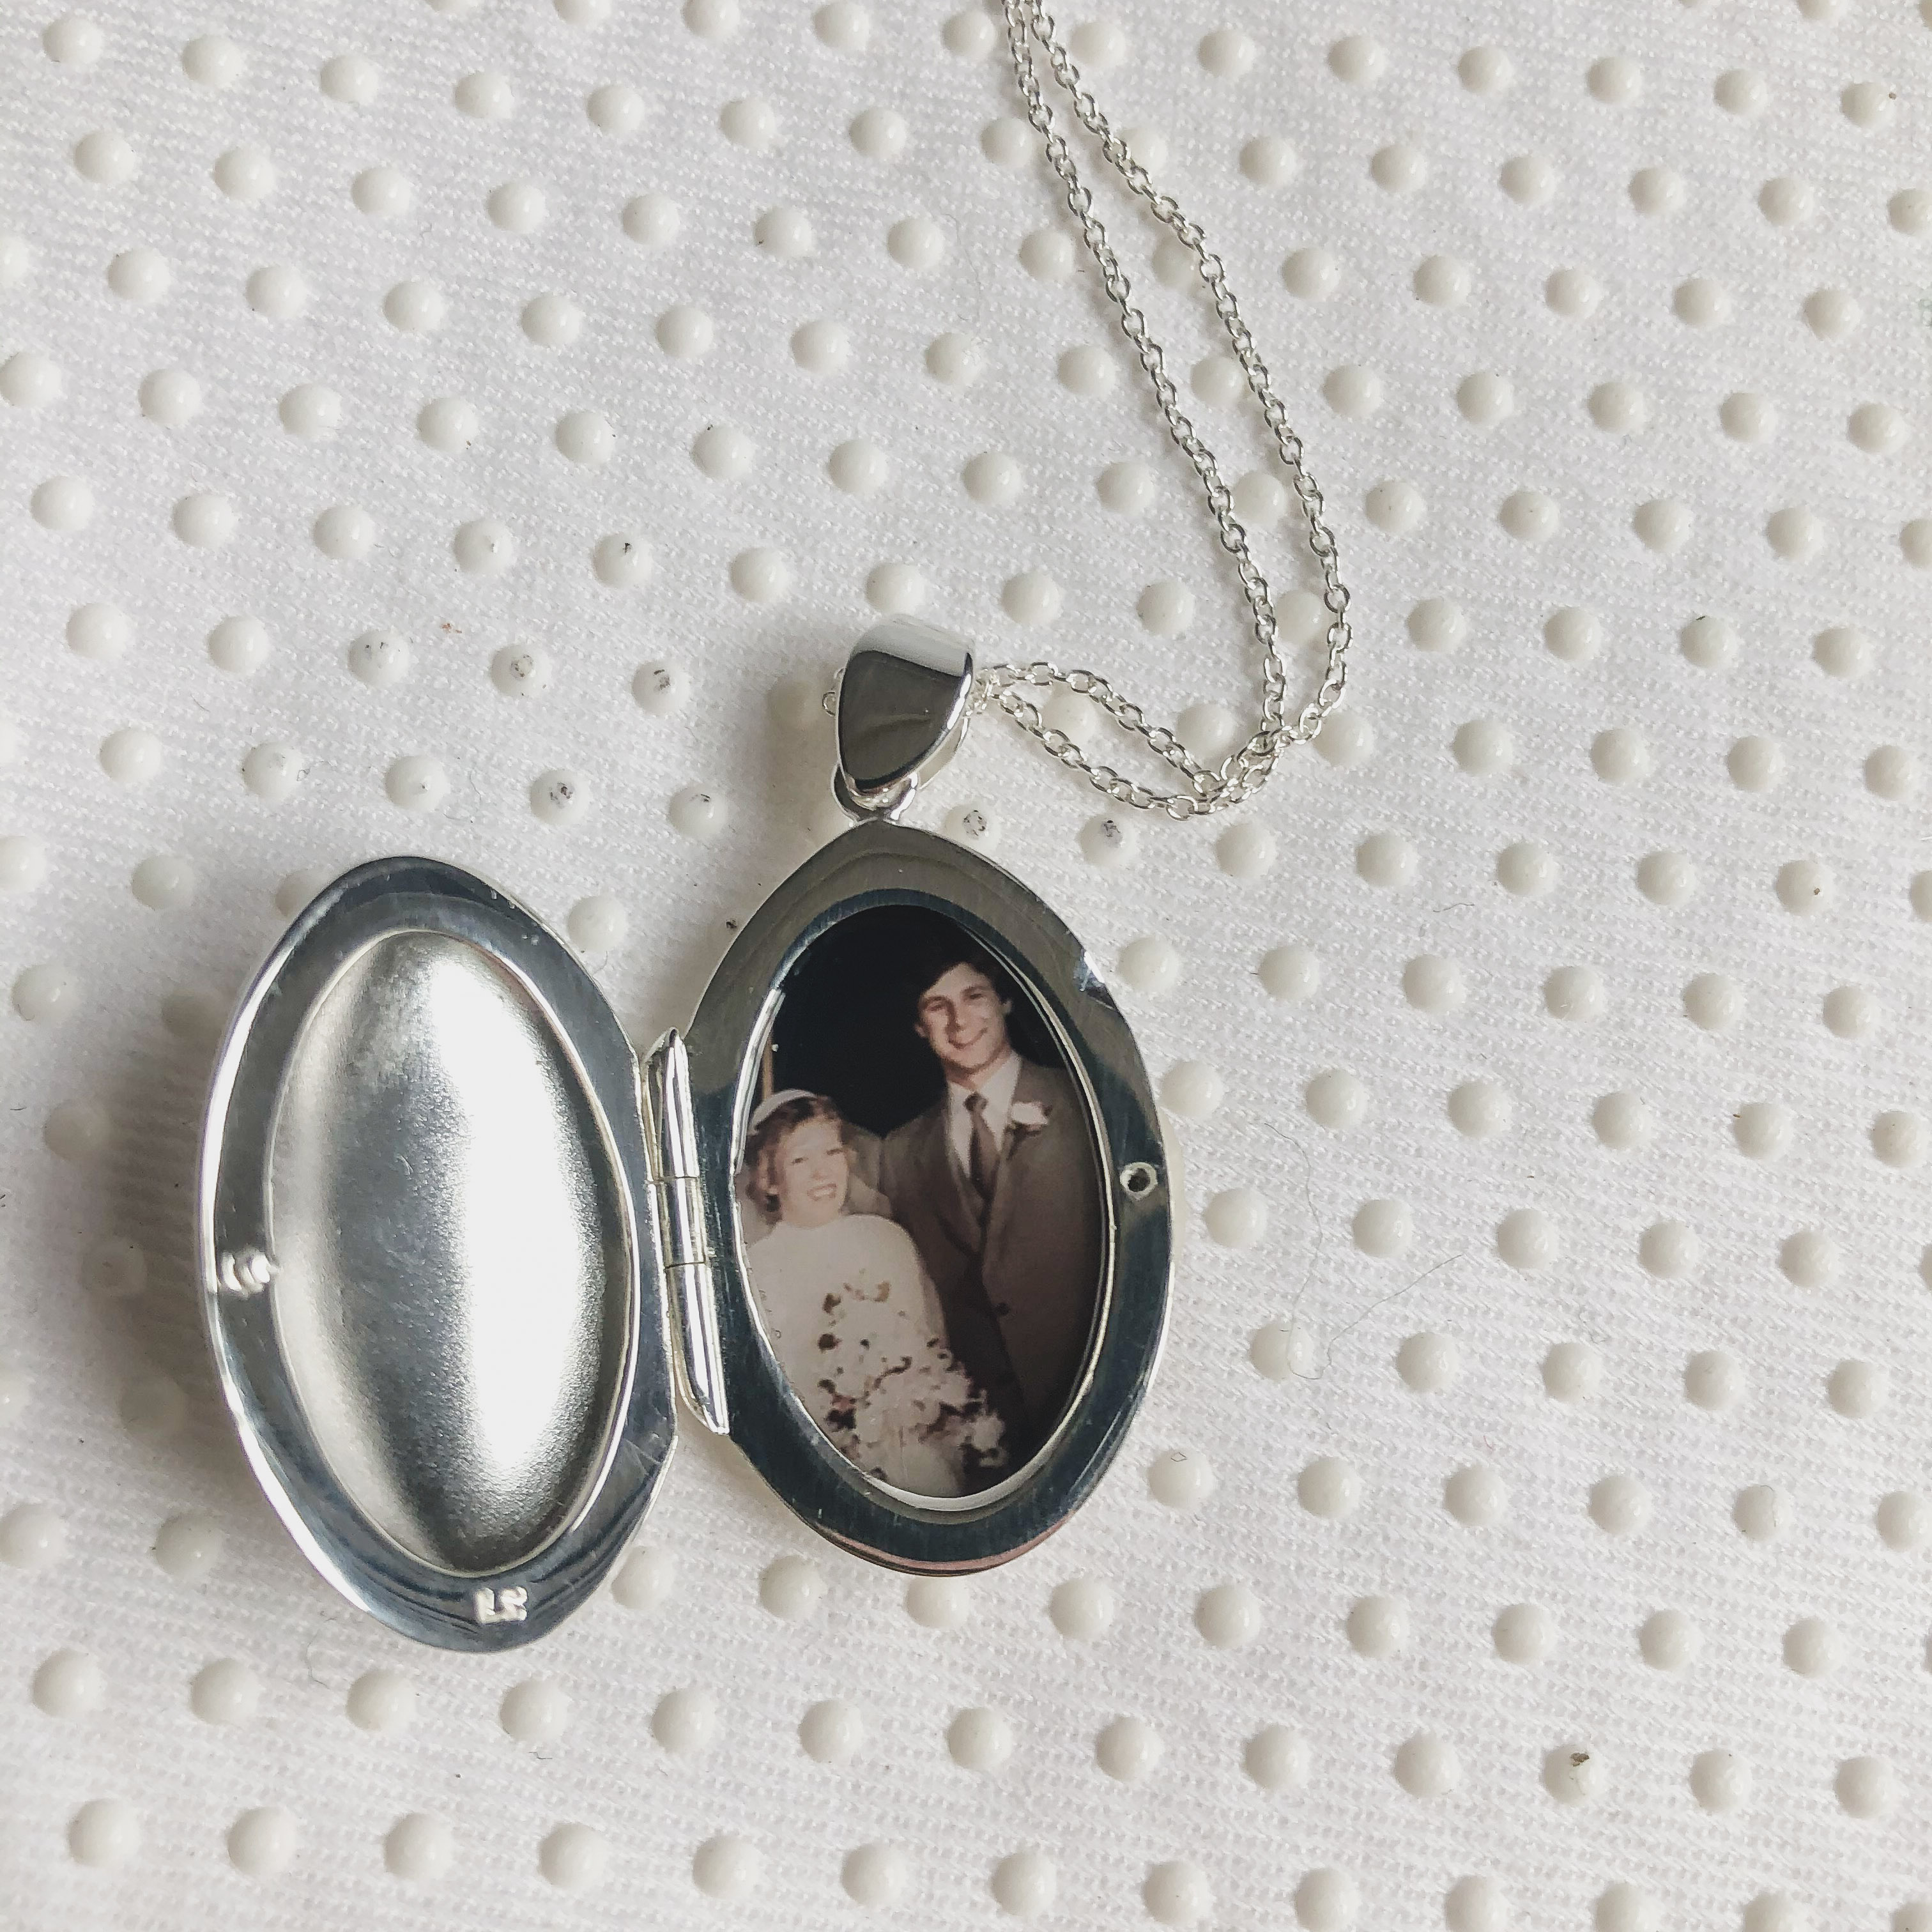 silver oval locket with photo of couple from 1970s on their wedding day